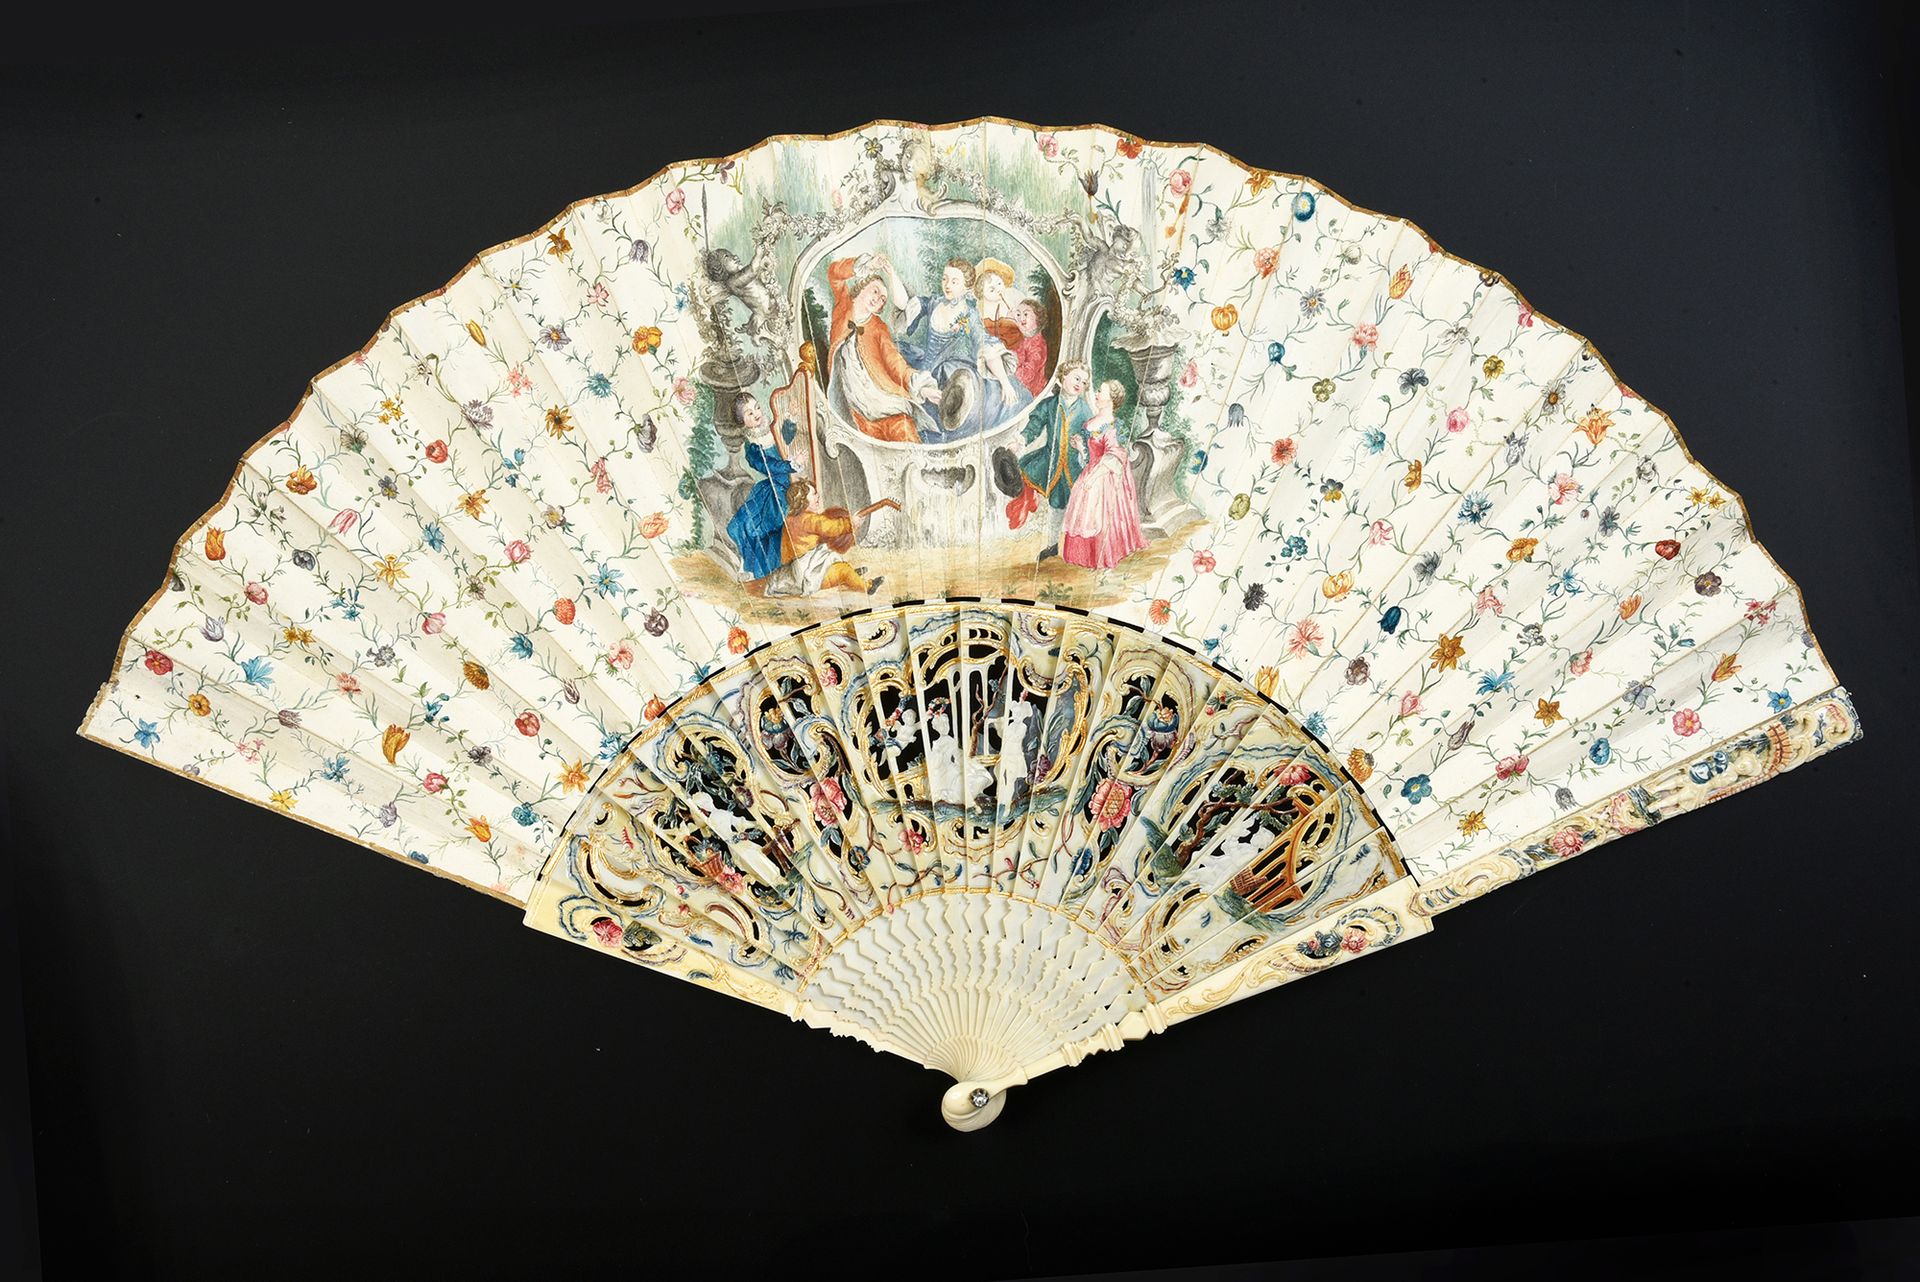 Null Dancers, circa 1750-1760
Folded fan, skin sheet, mounted in English style a&hellip;